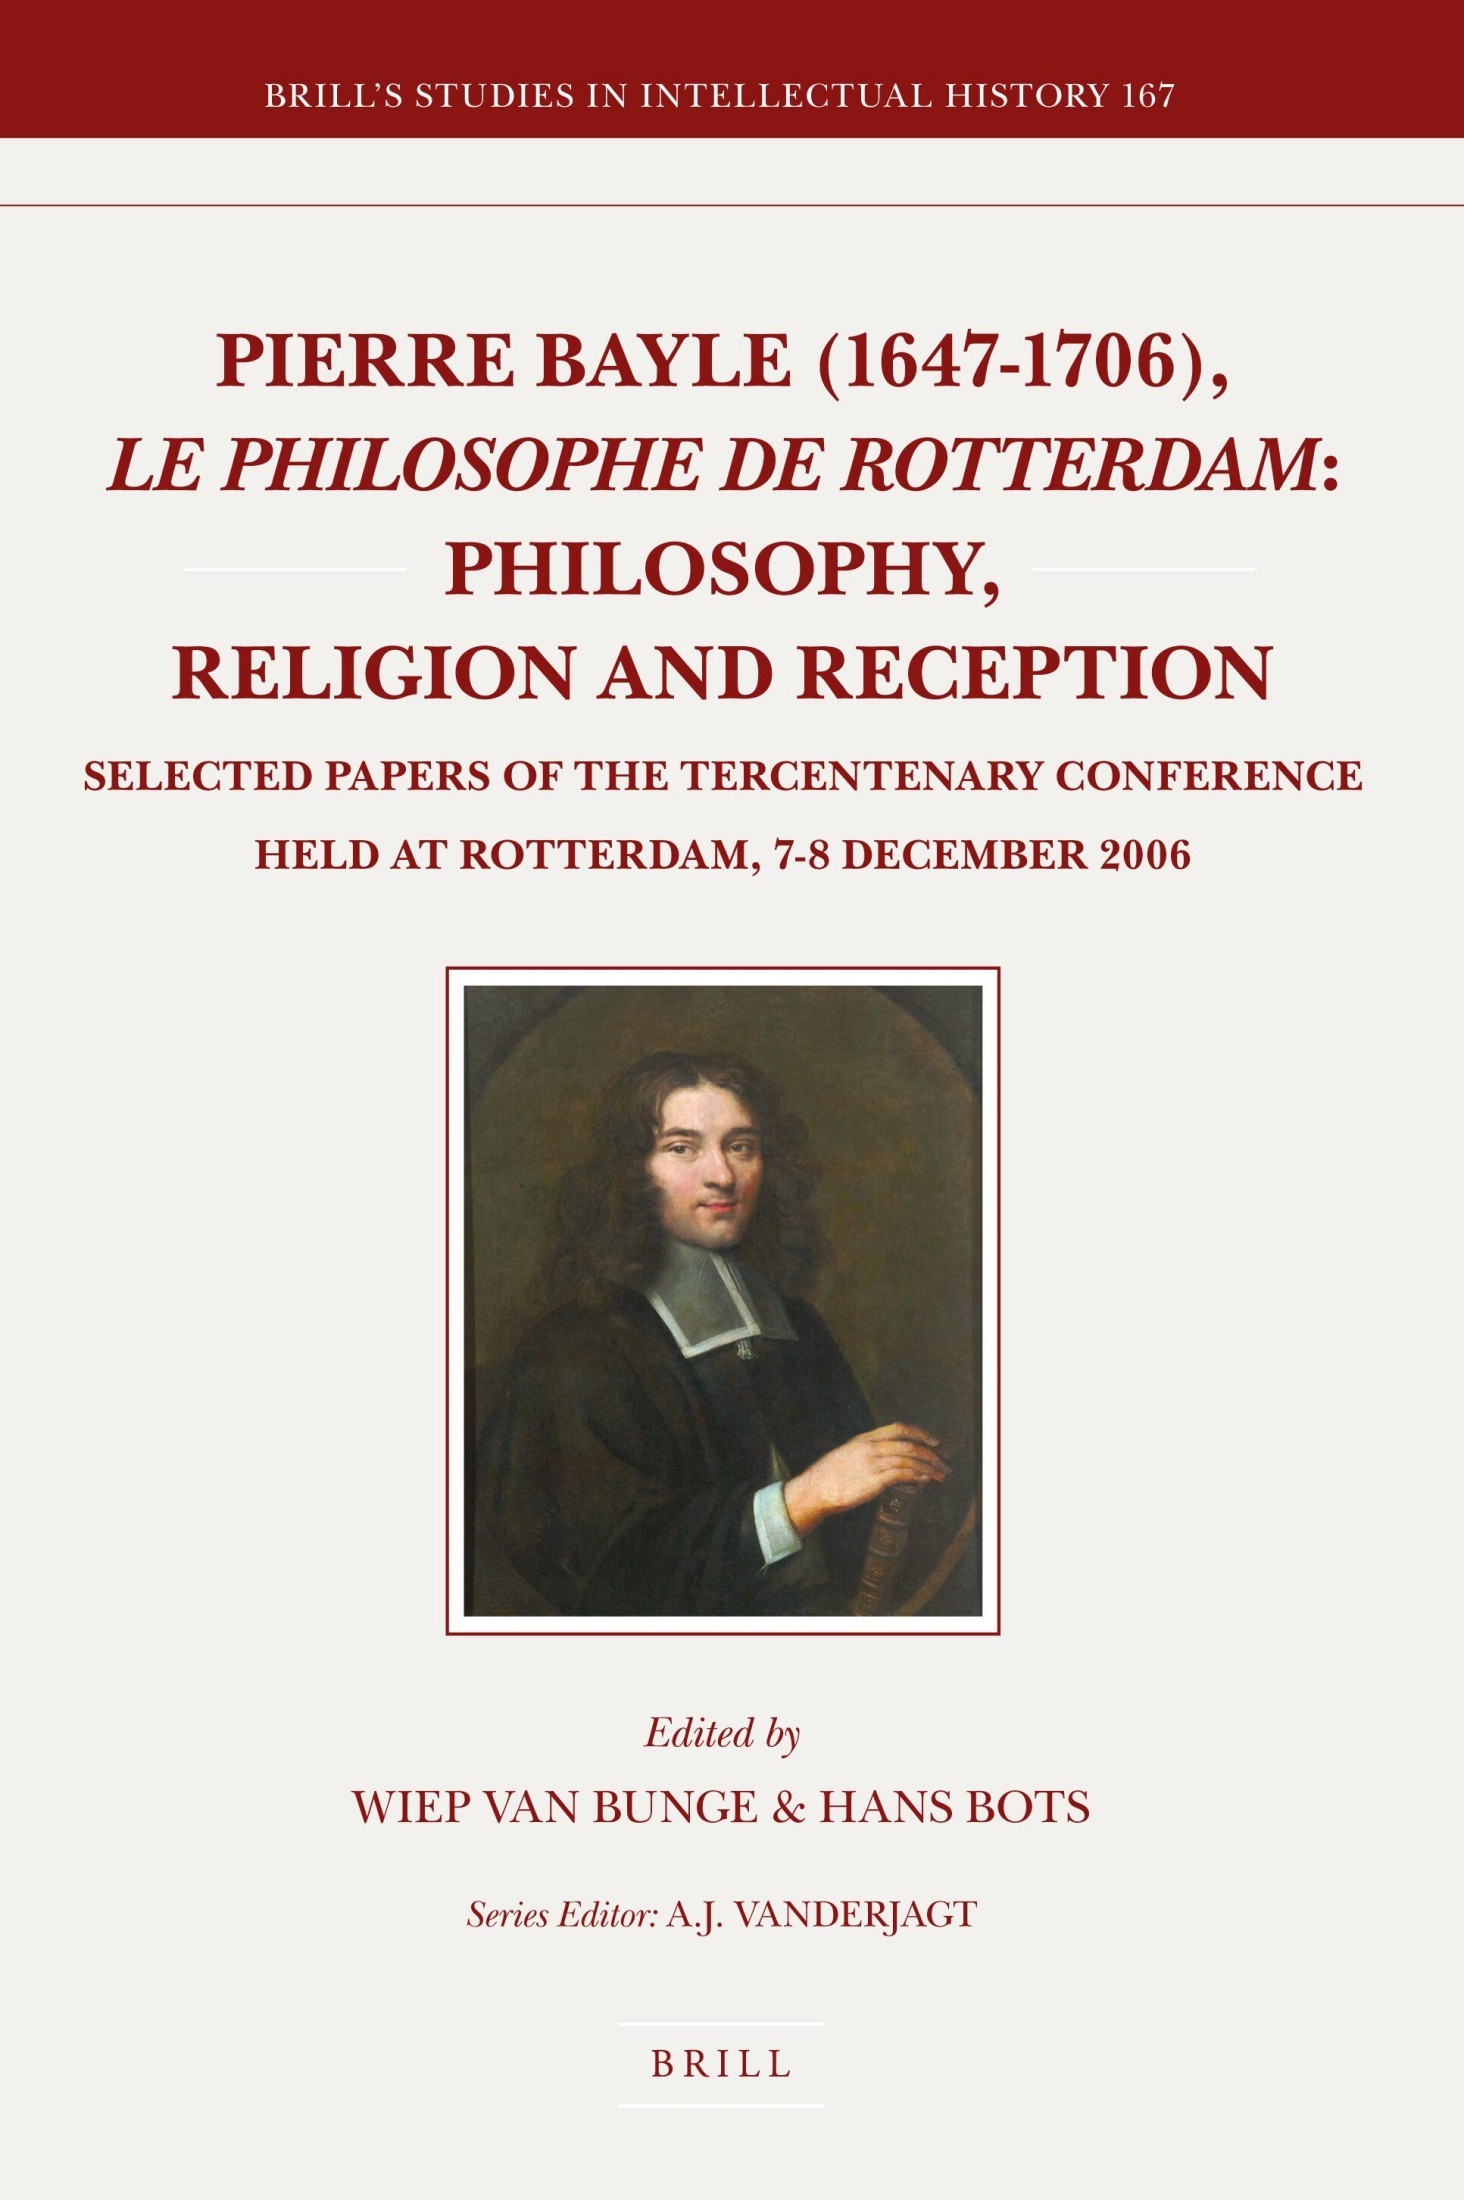 From Stevin to Spinoza: An Essay on Philosophy in the Seventeenth-Century Dutch Republic